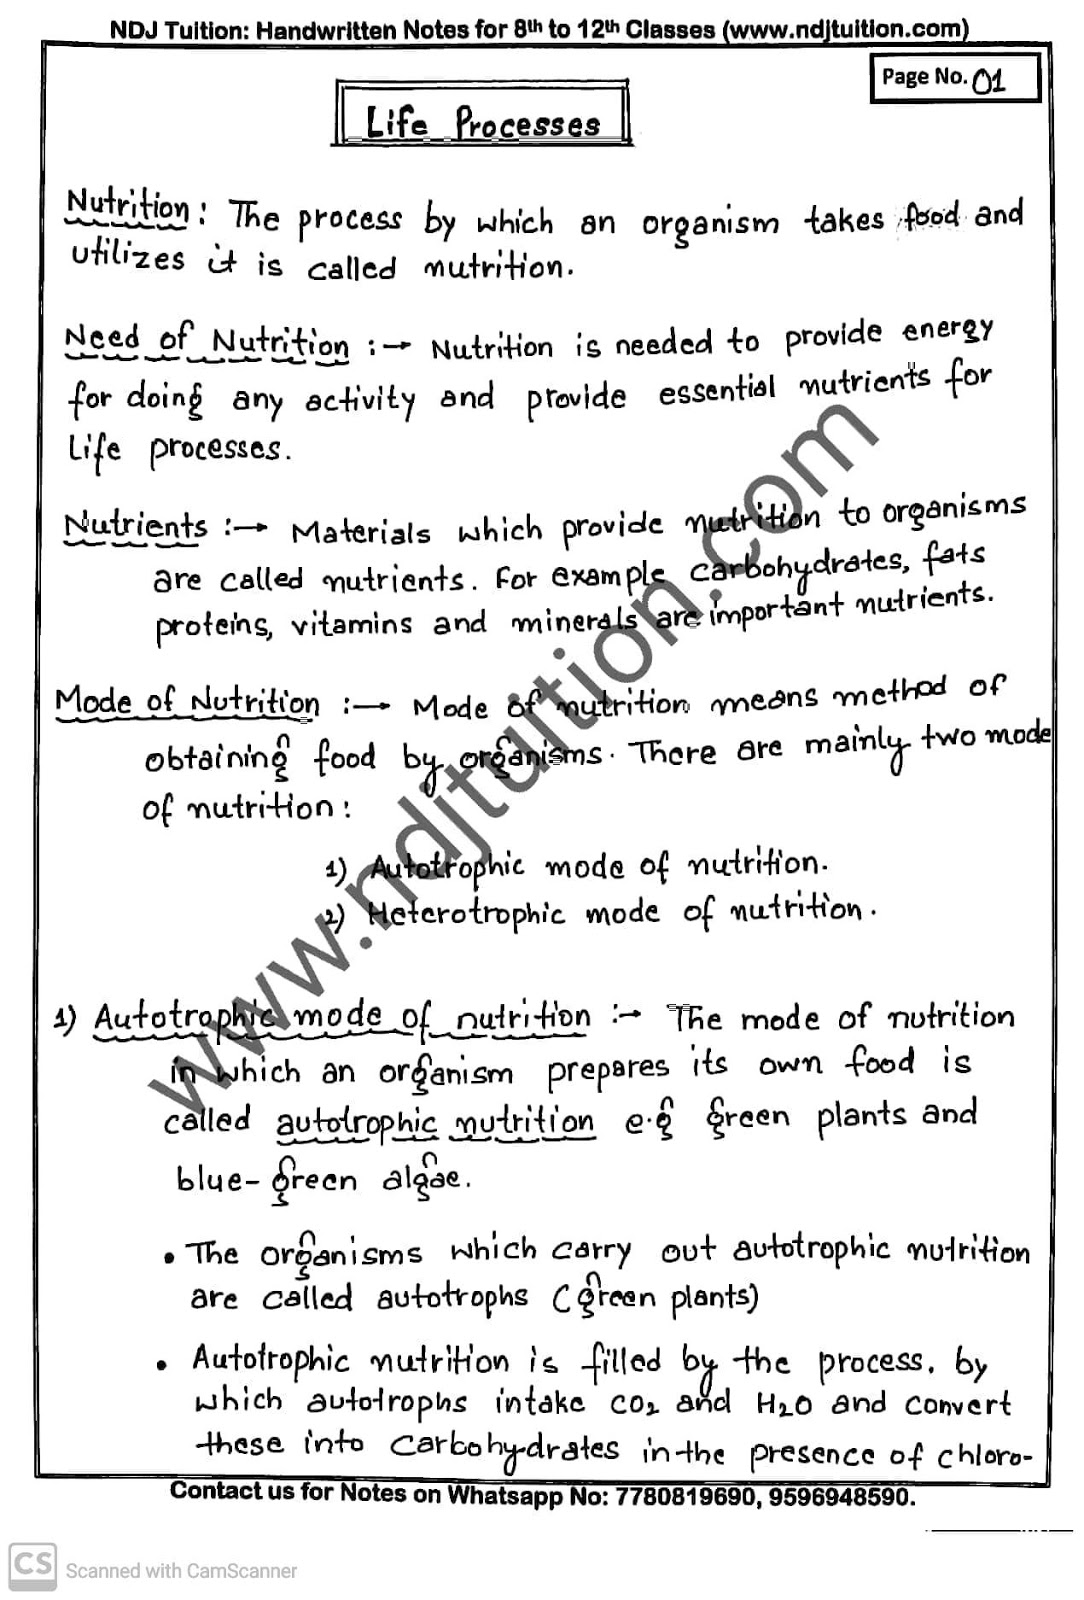 s chand biology class 10 life processes pdf download